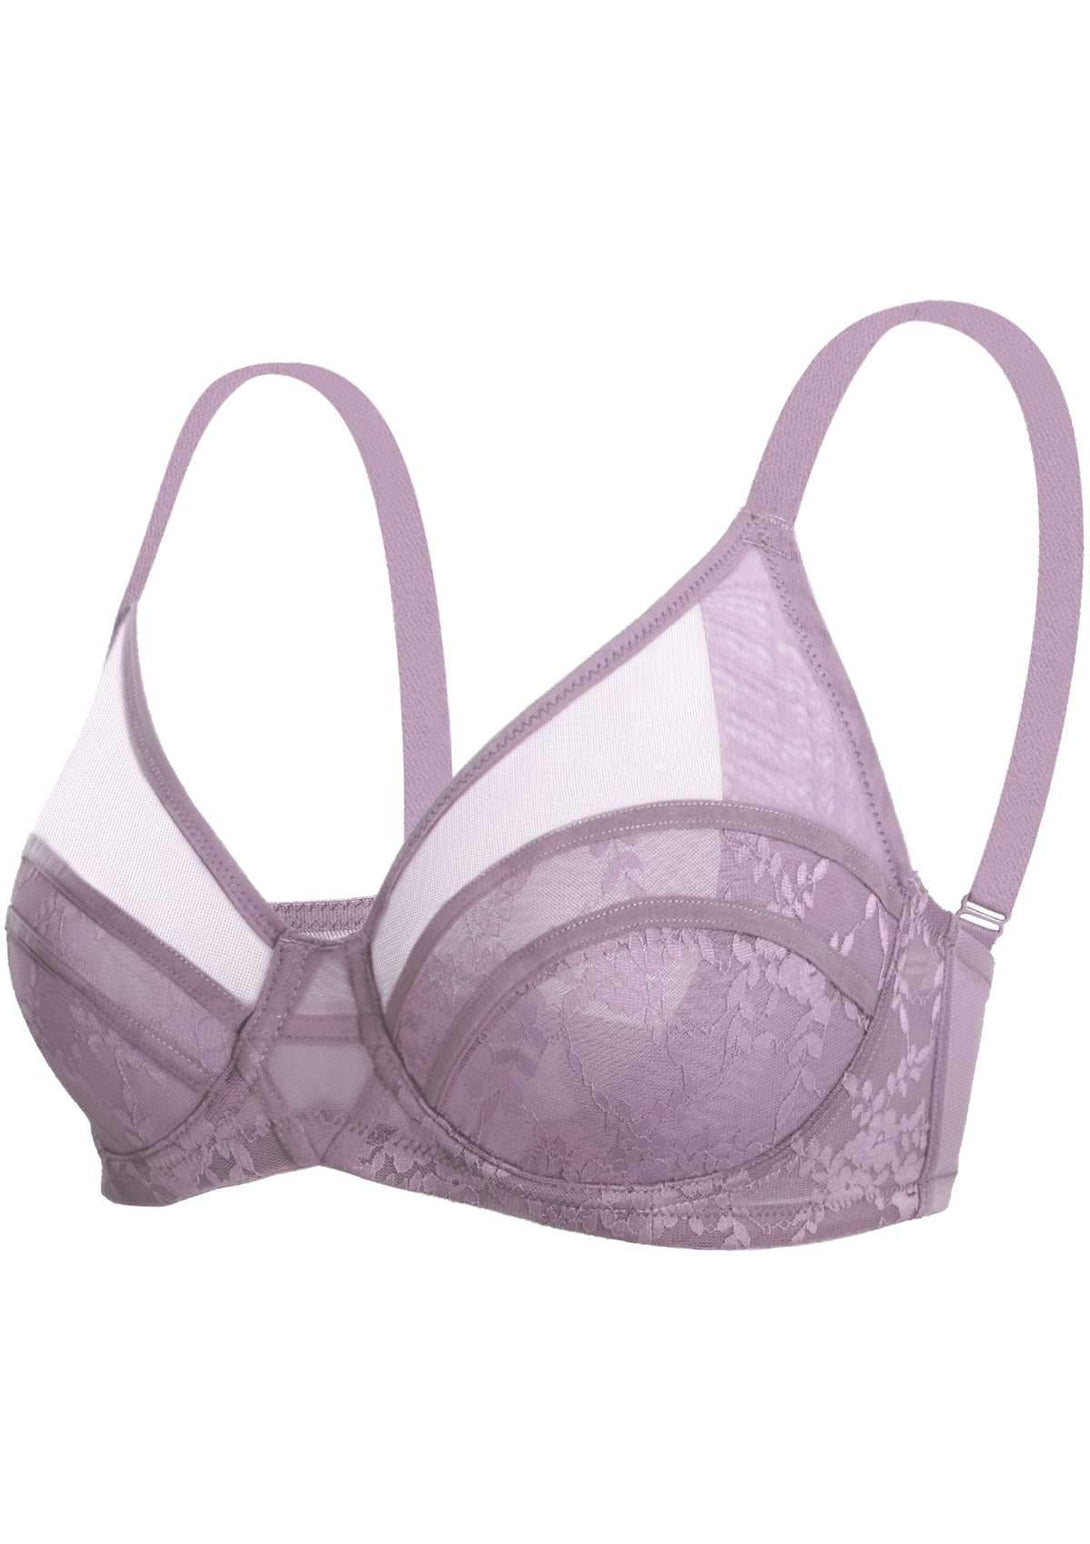 HSIA HSIA Sheer Lace Unlined Bra